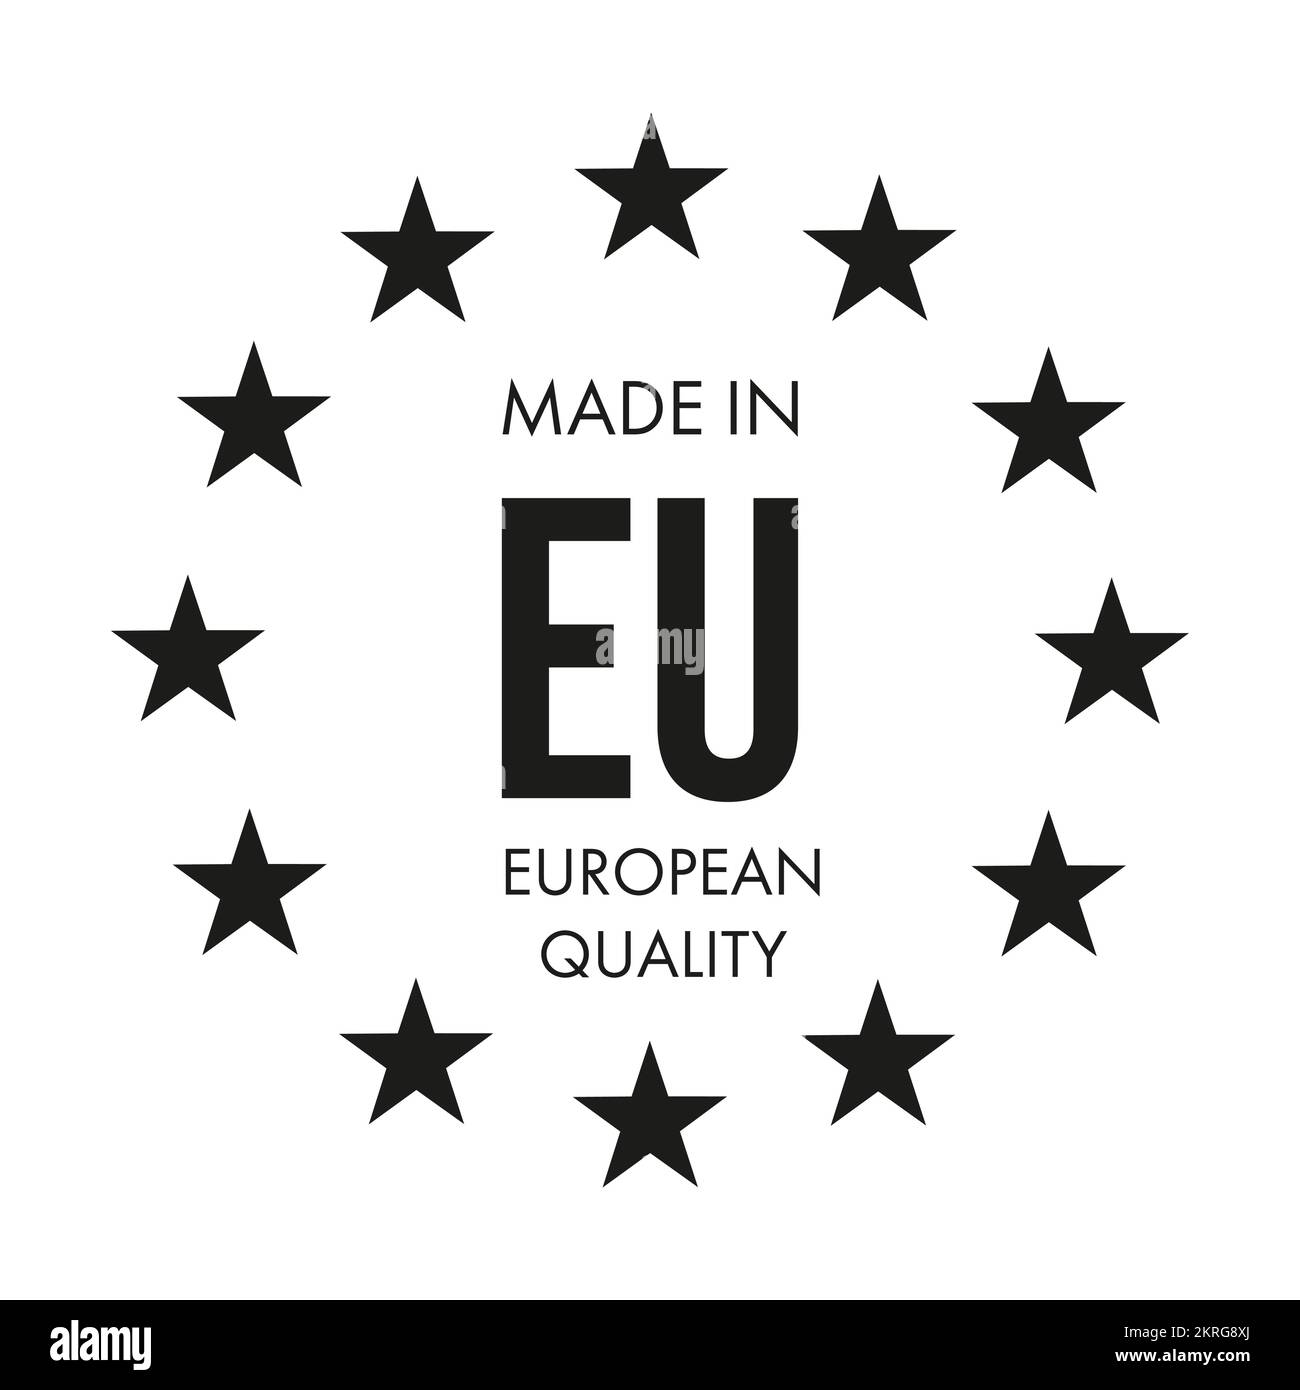 Made in EU European quality stamp Stock Vector